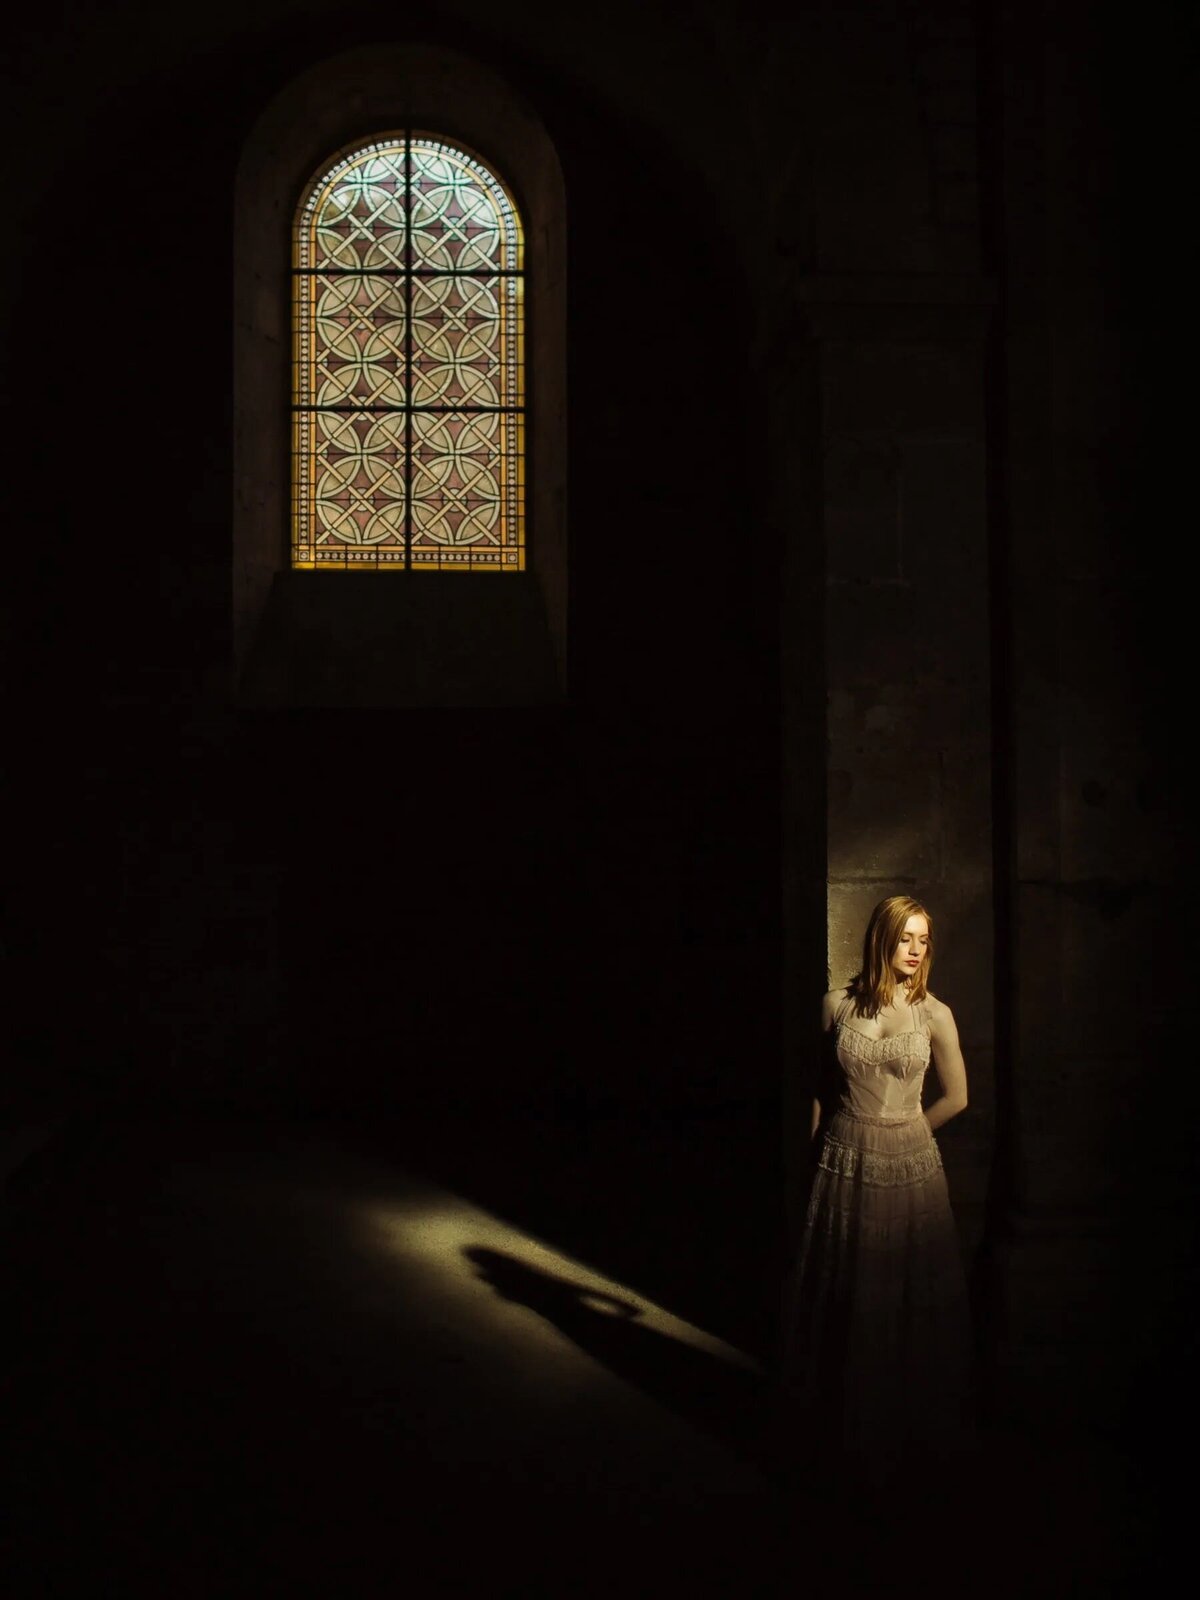 Light shining down on a girl in a dark cathedral.